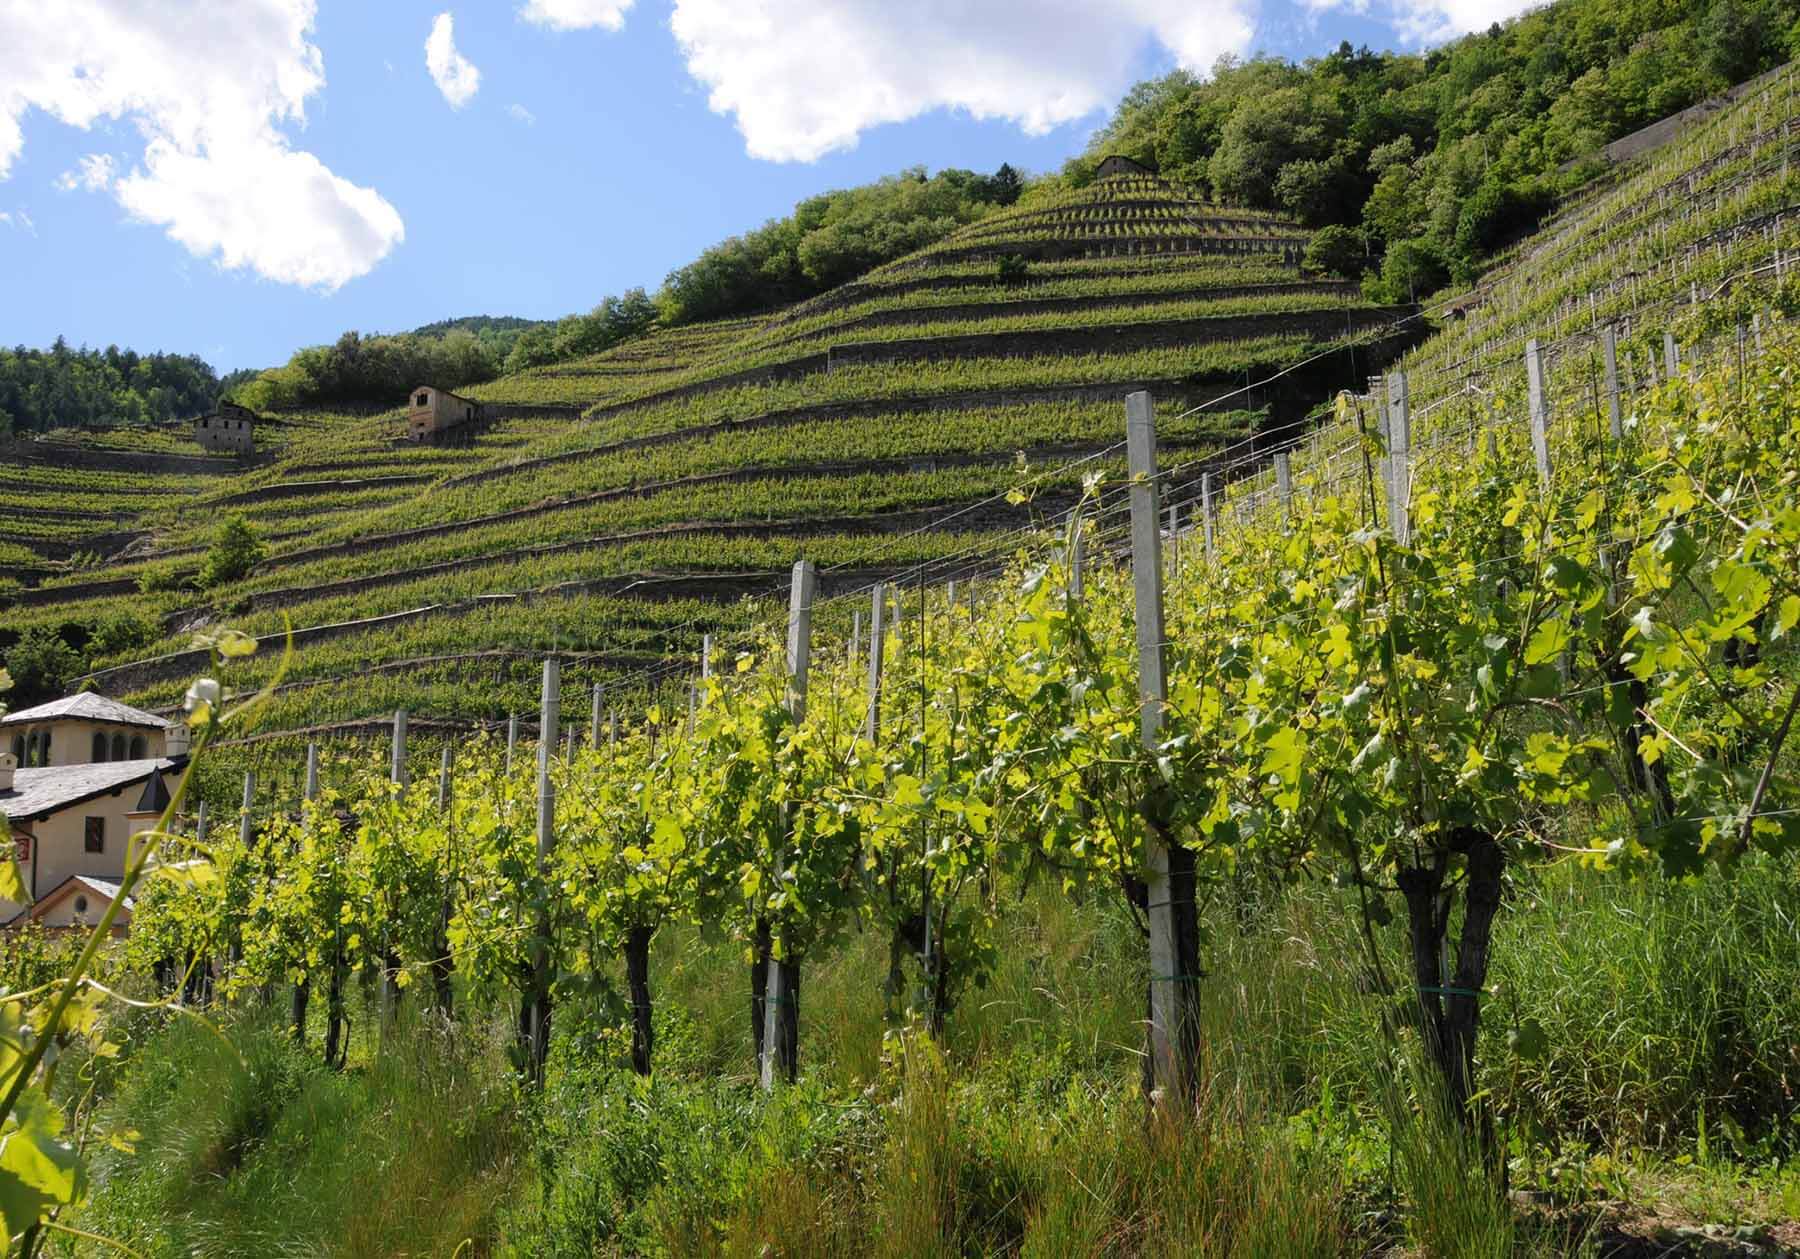 the heroic vineyards of the Triacca winery in Valtellina